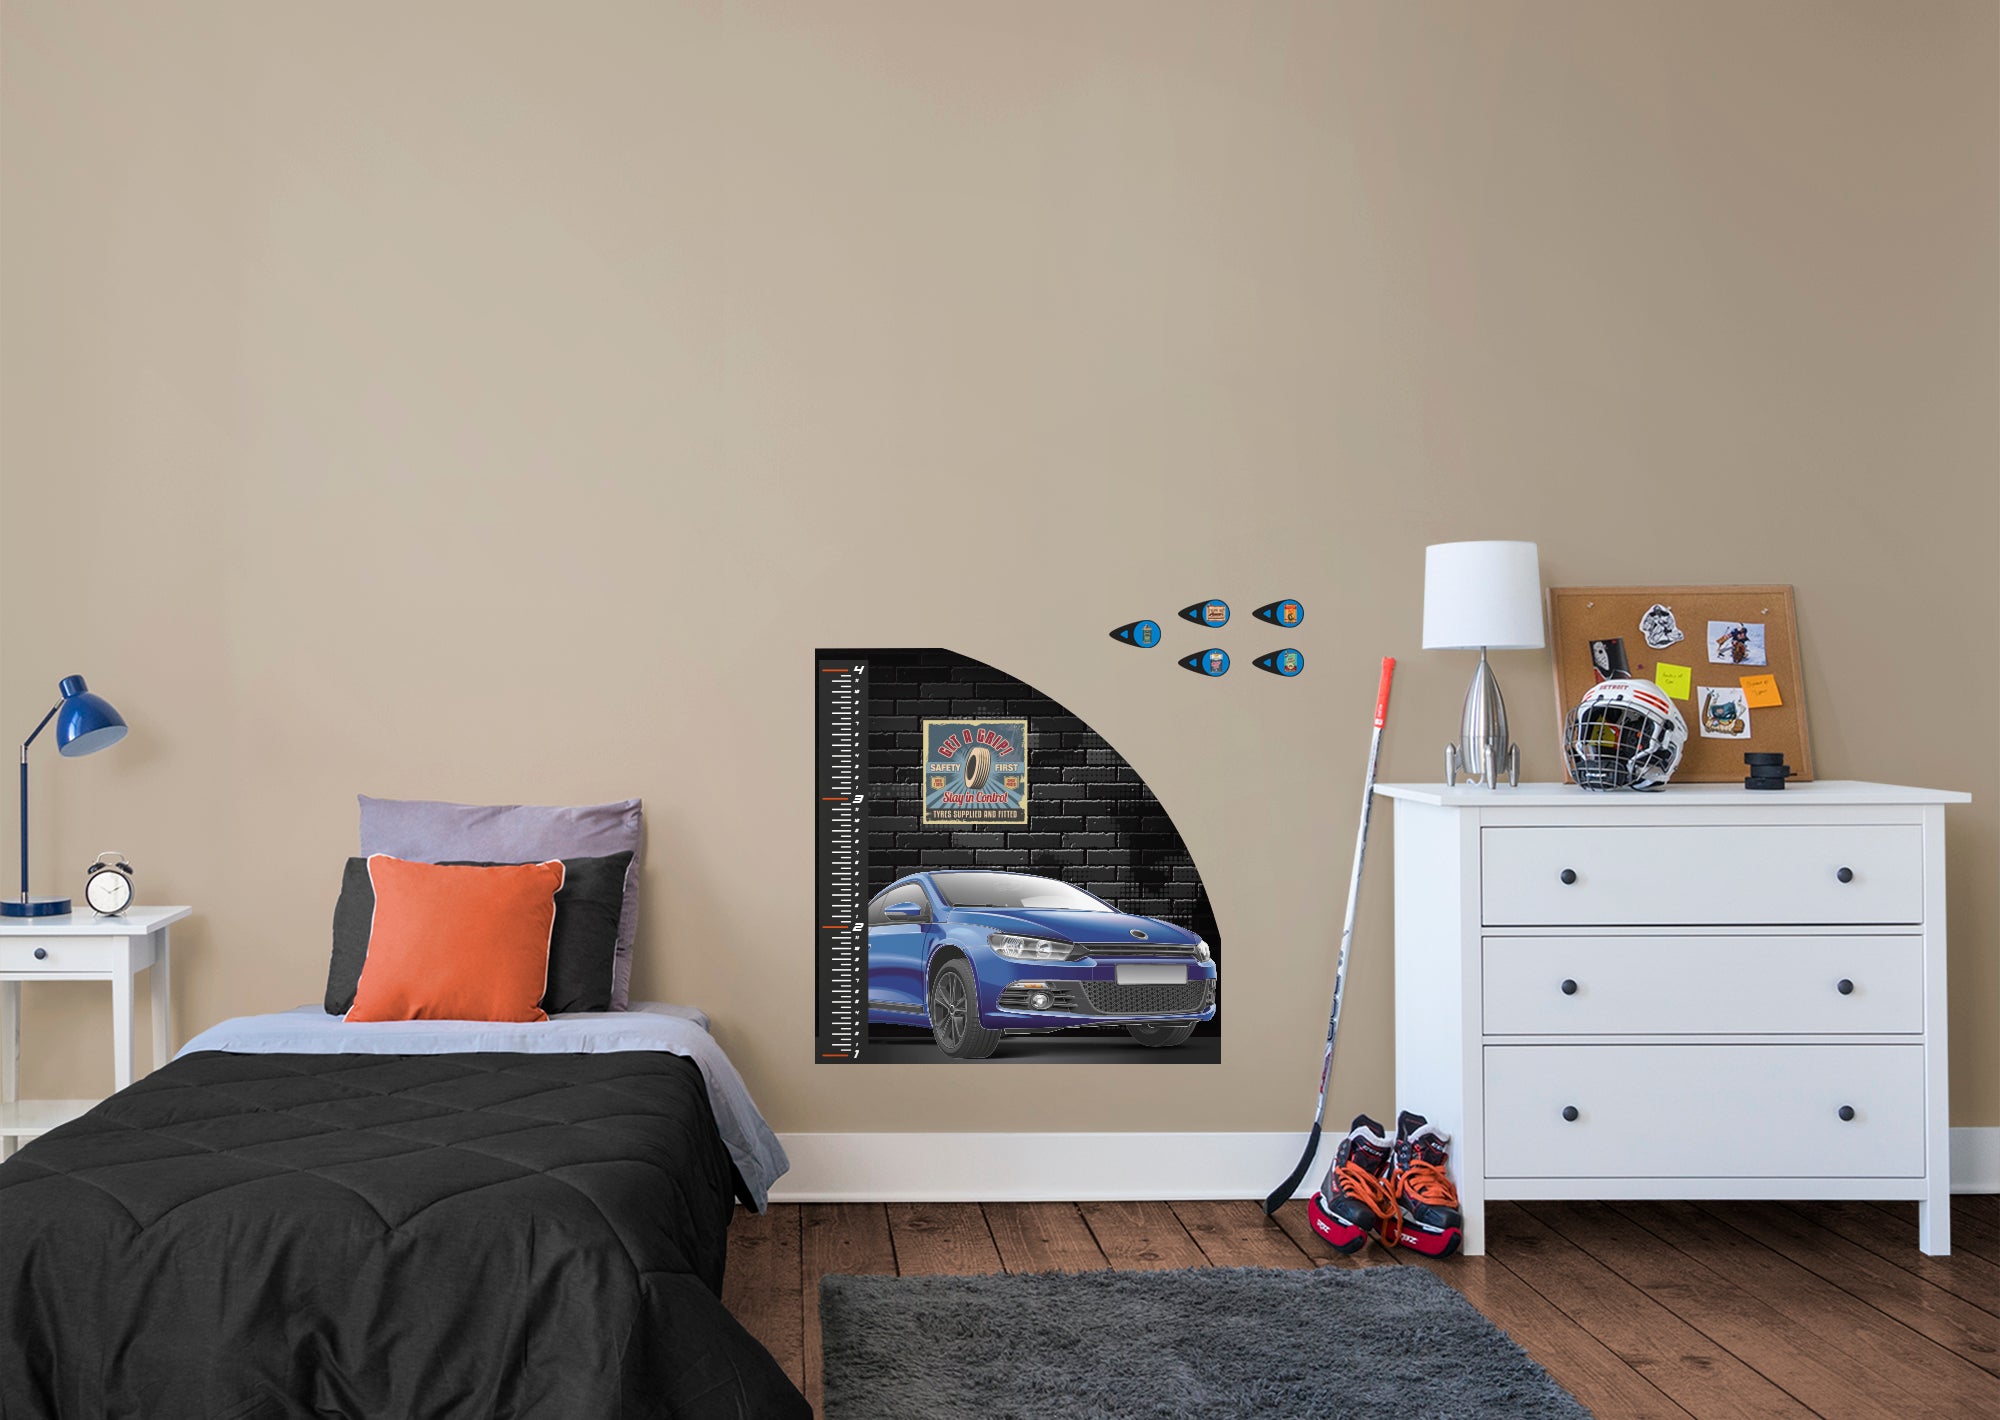 Automobile Growth Charts Sport Car - Removable Wall Decal Growth Chart (38"W x 39"H) by Fathead | Vinyl